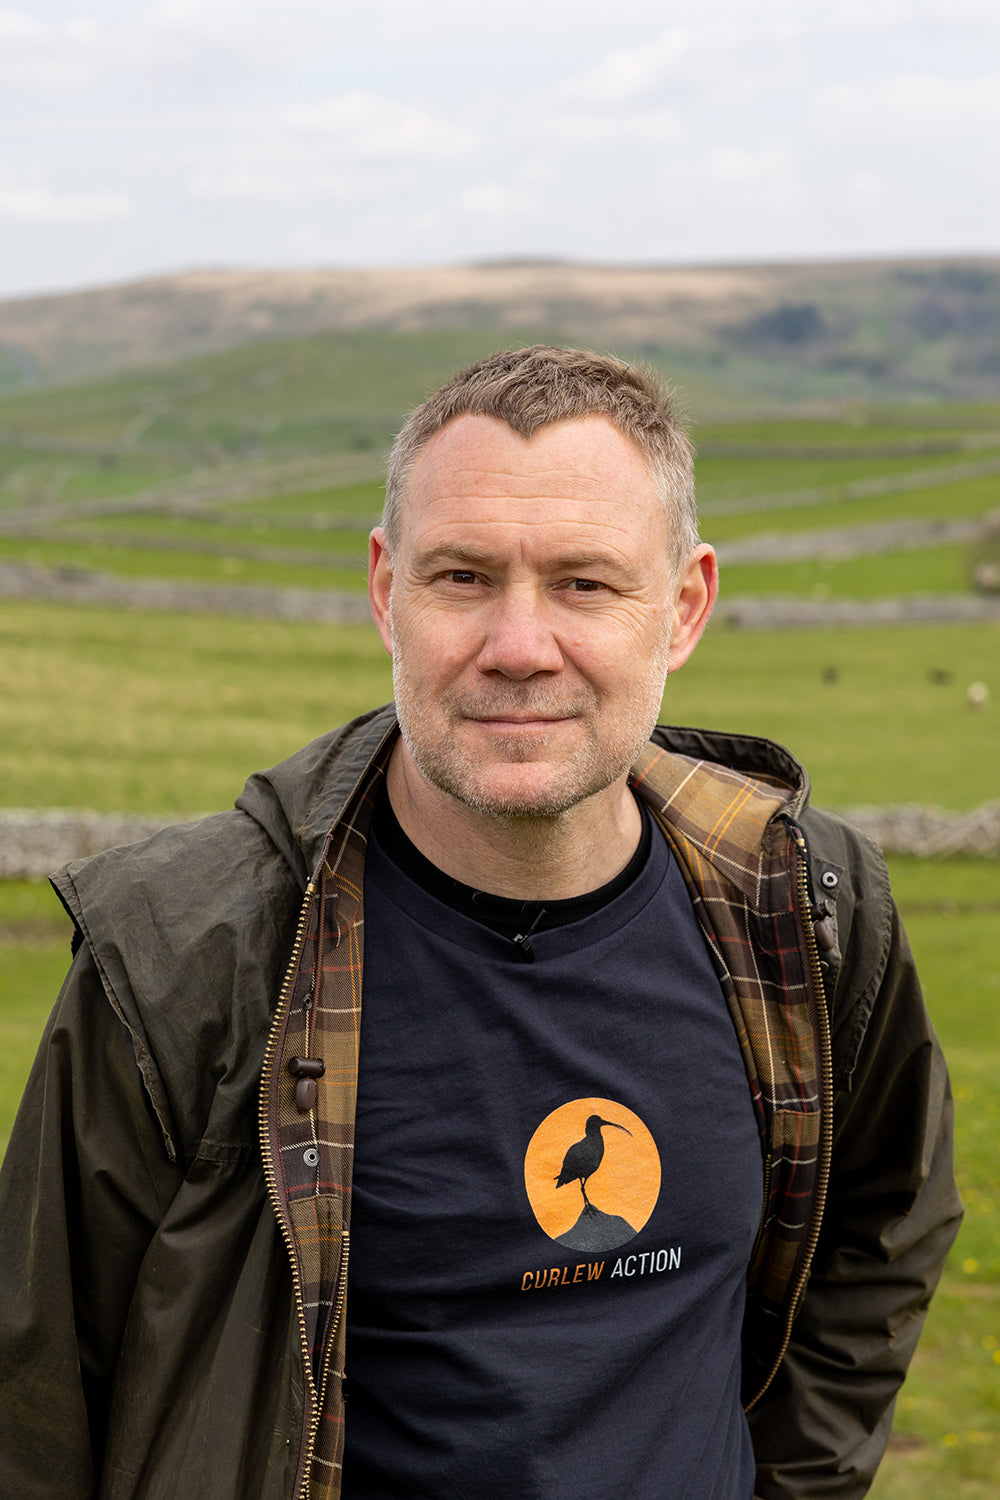 David Gray with Curlew Action Tee